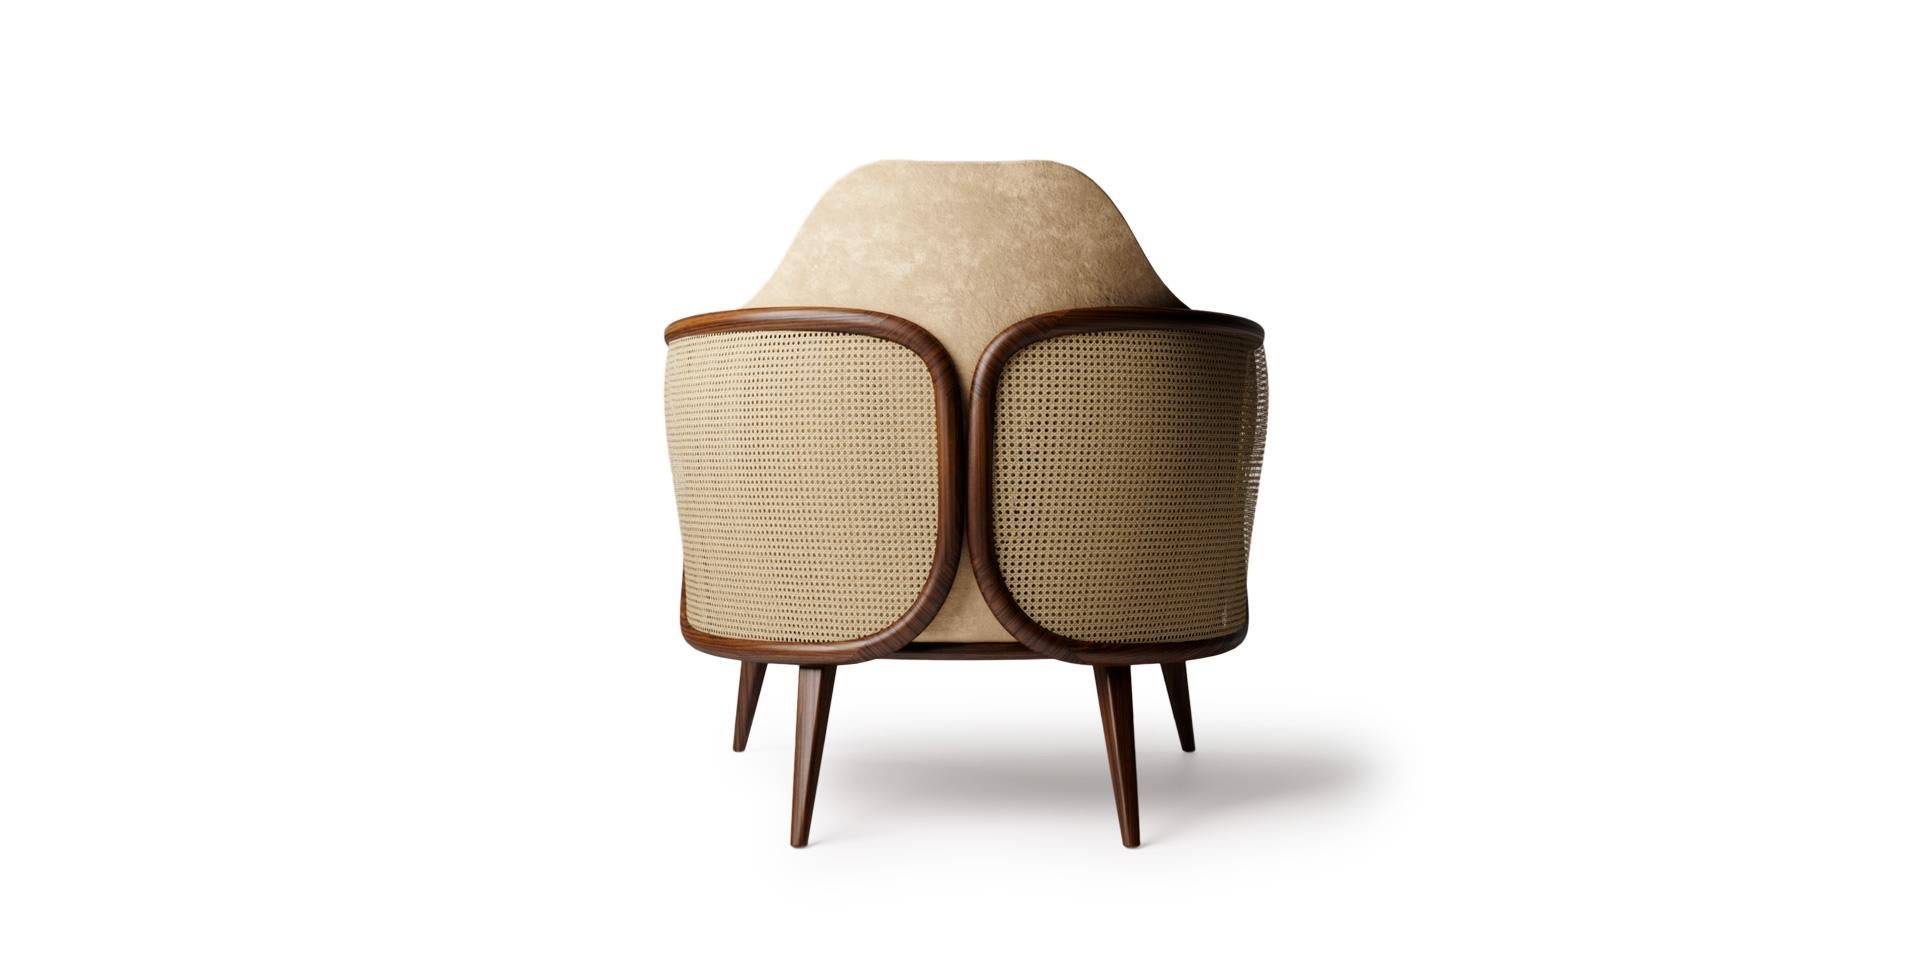 The Metamorphosis armchair with a unique round shape reminds us of wonderful butterflies.
These are the emblematic symbol of the personal transformation that Alma de Luce pays tribute to by inspiring us with the beauty and simplicity of the